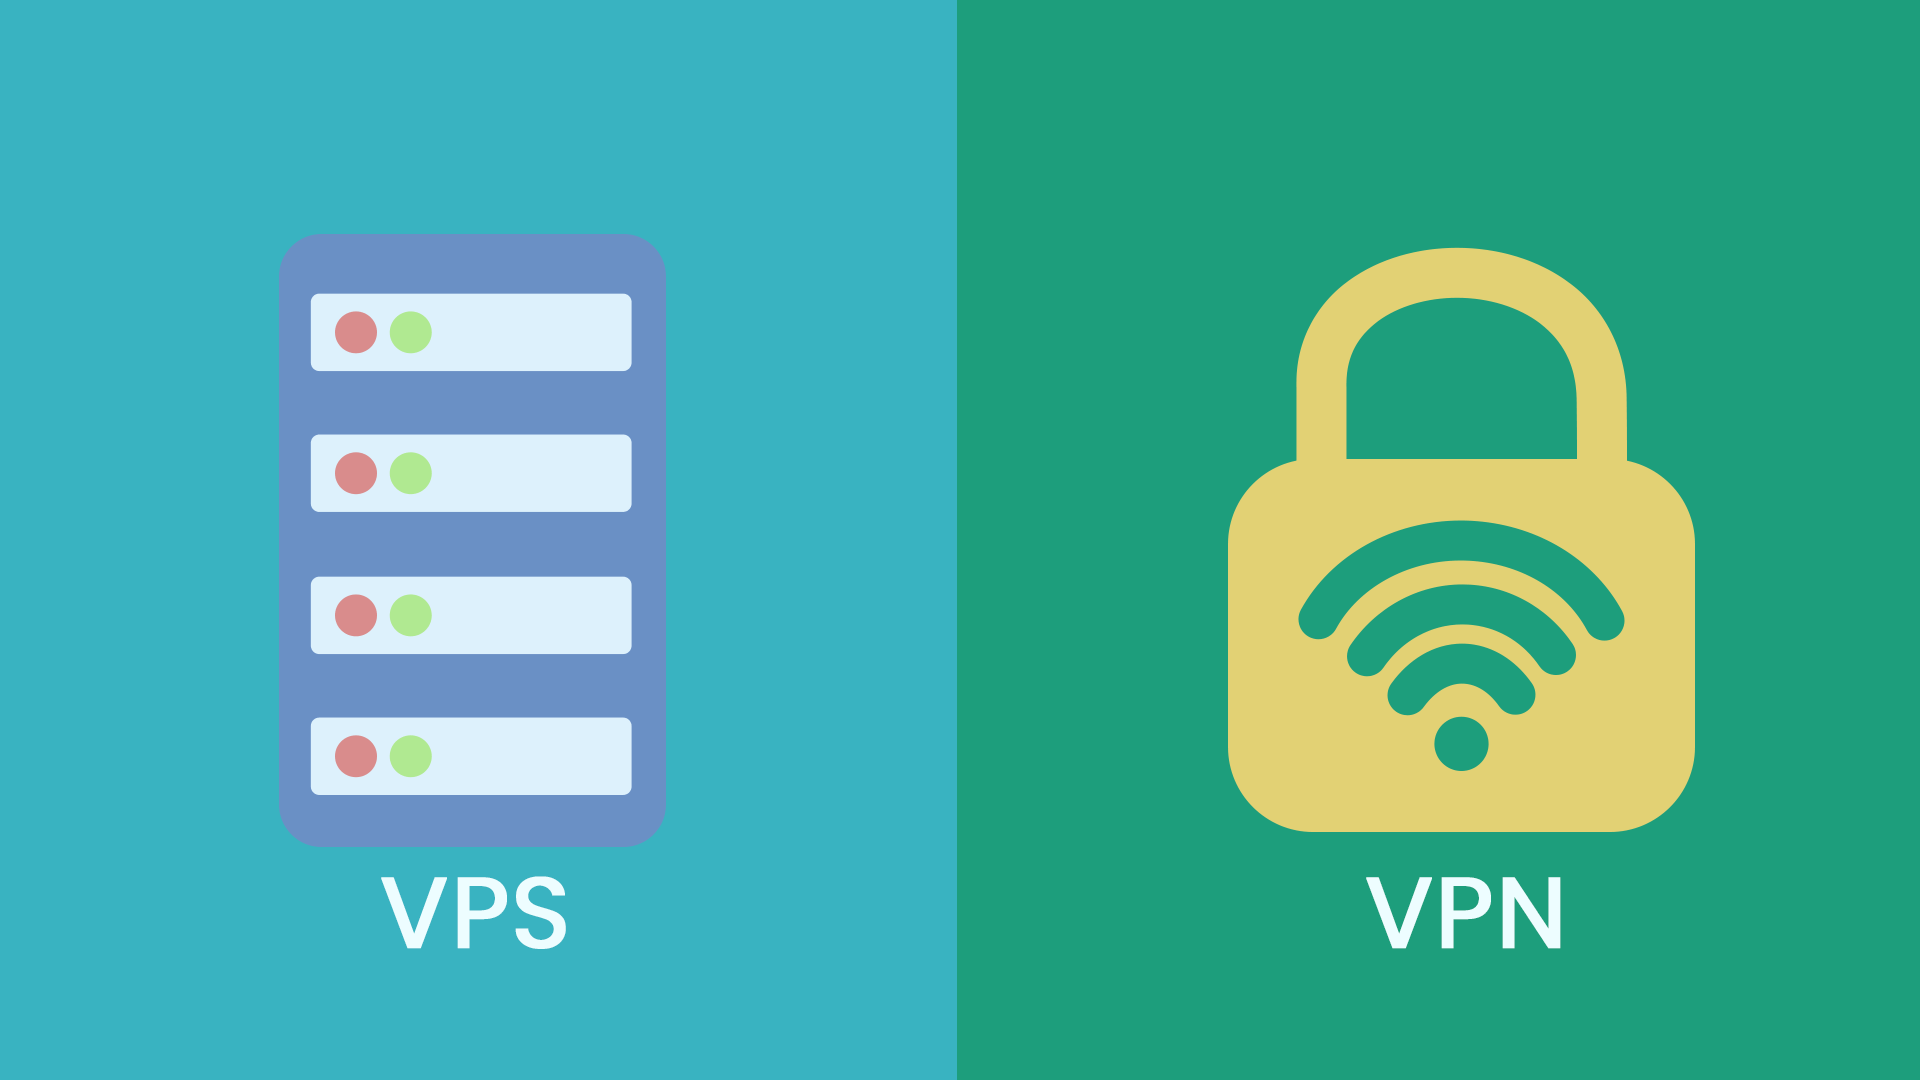 What is the difference between a VPN and a VPS